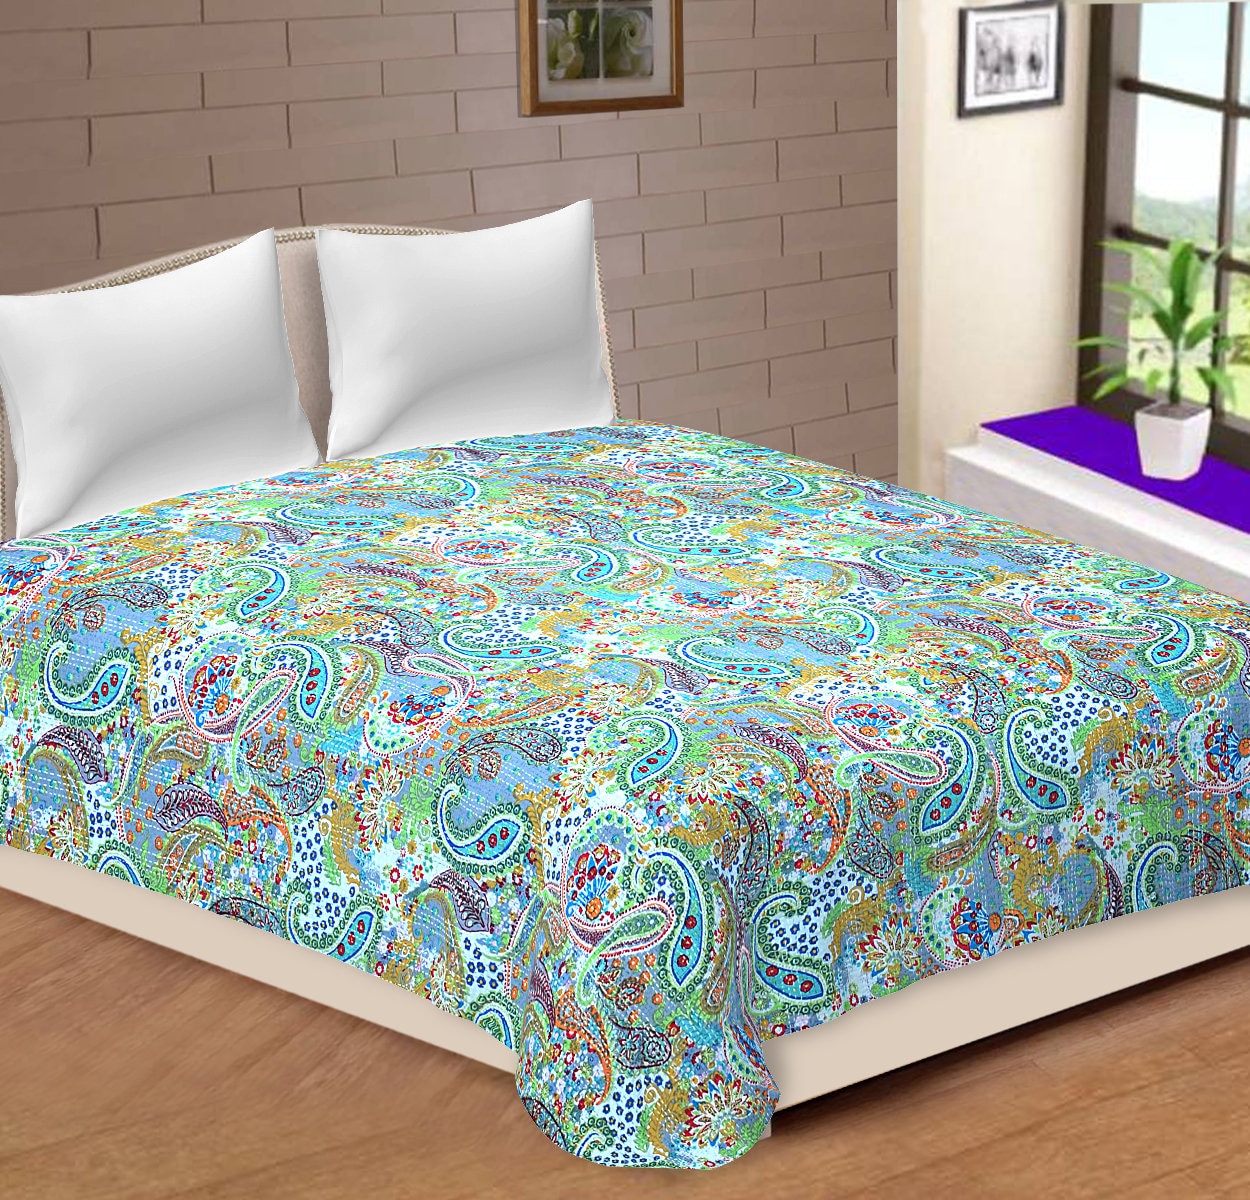 Indian Paisley Print Bedspread Quilts Blanket Throw Bedding Kantha Beige Colour 